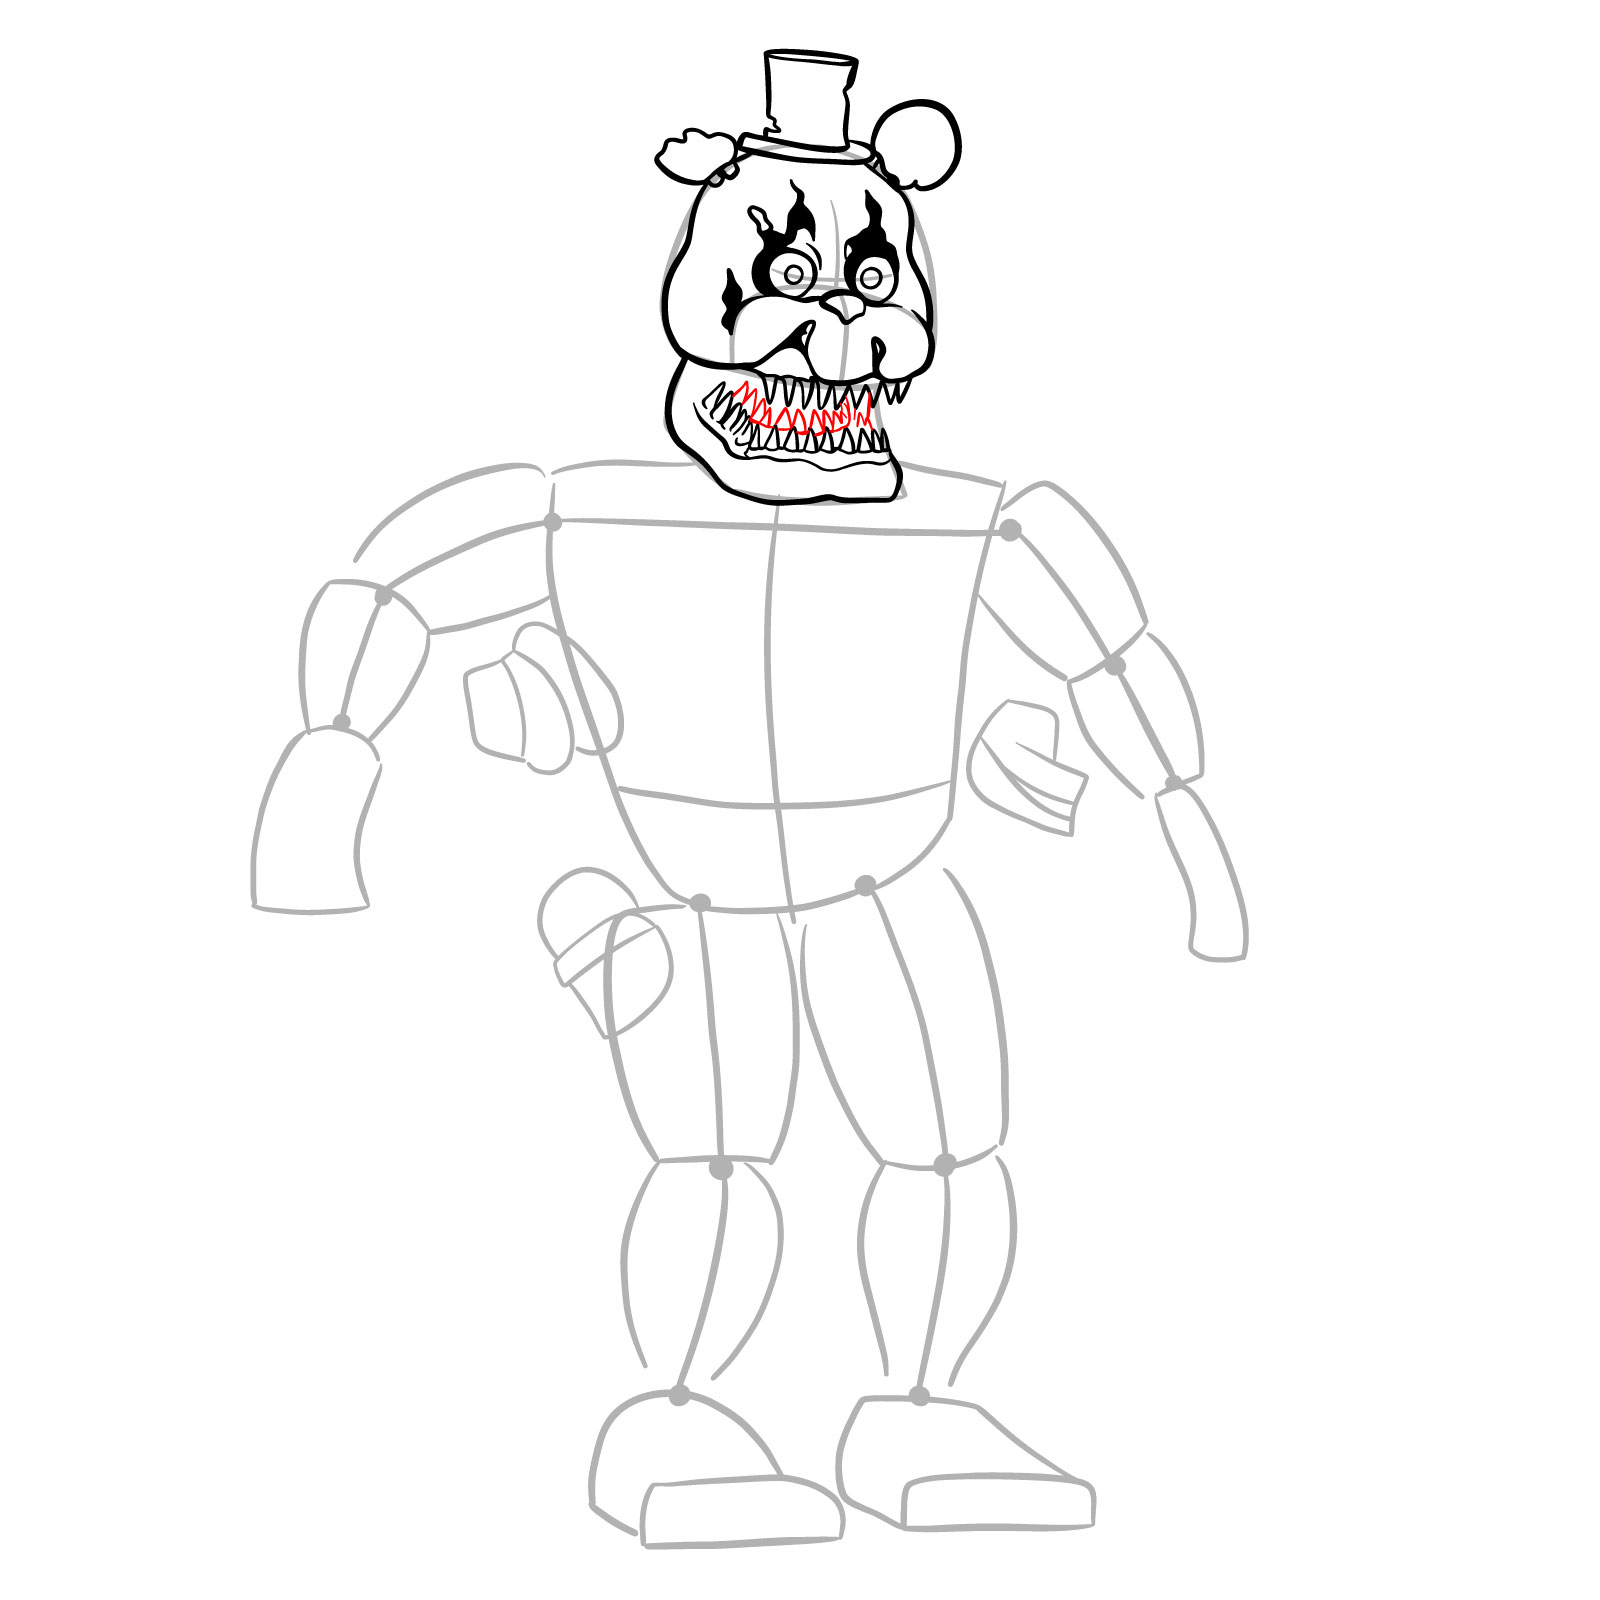 How to draw Nightmare Freddy - step 14